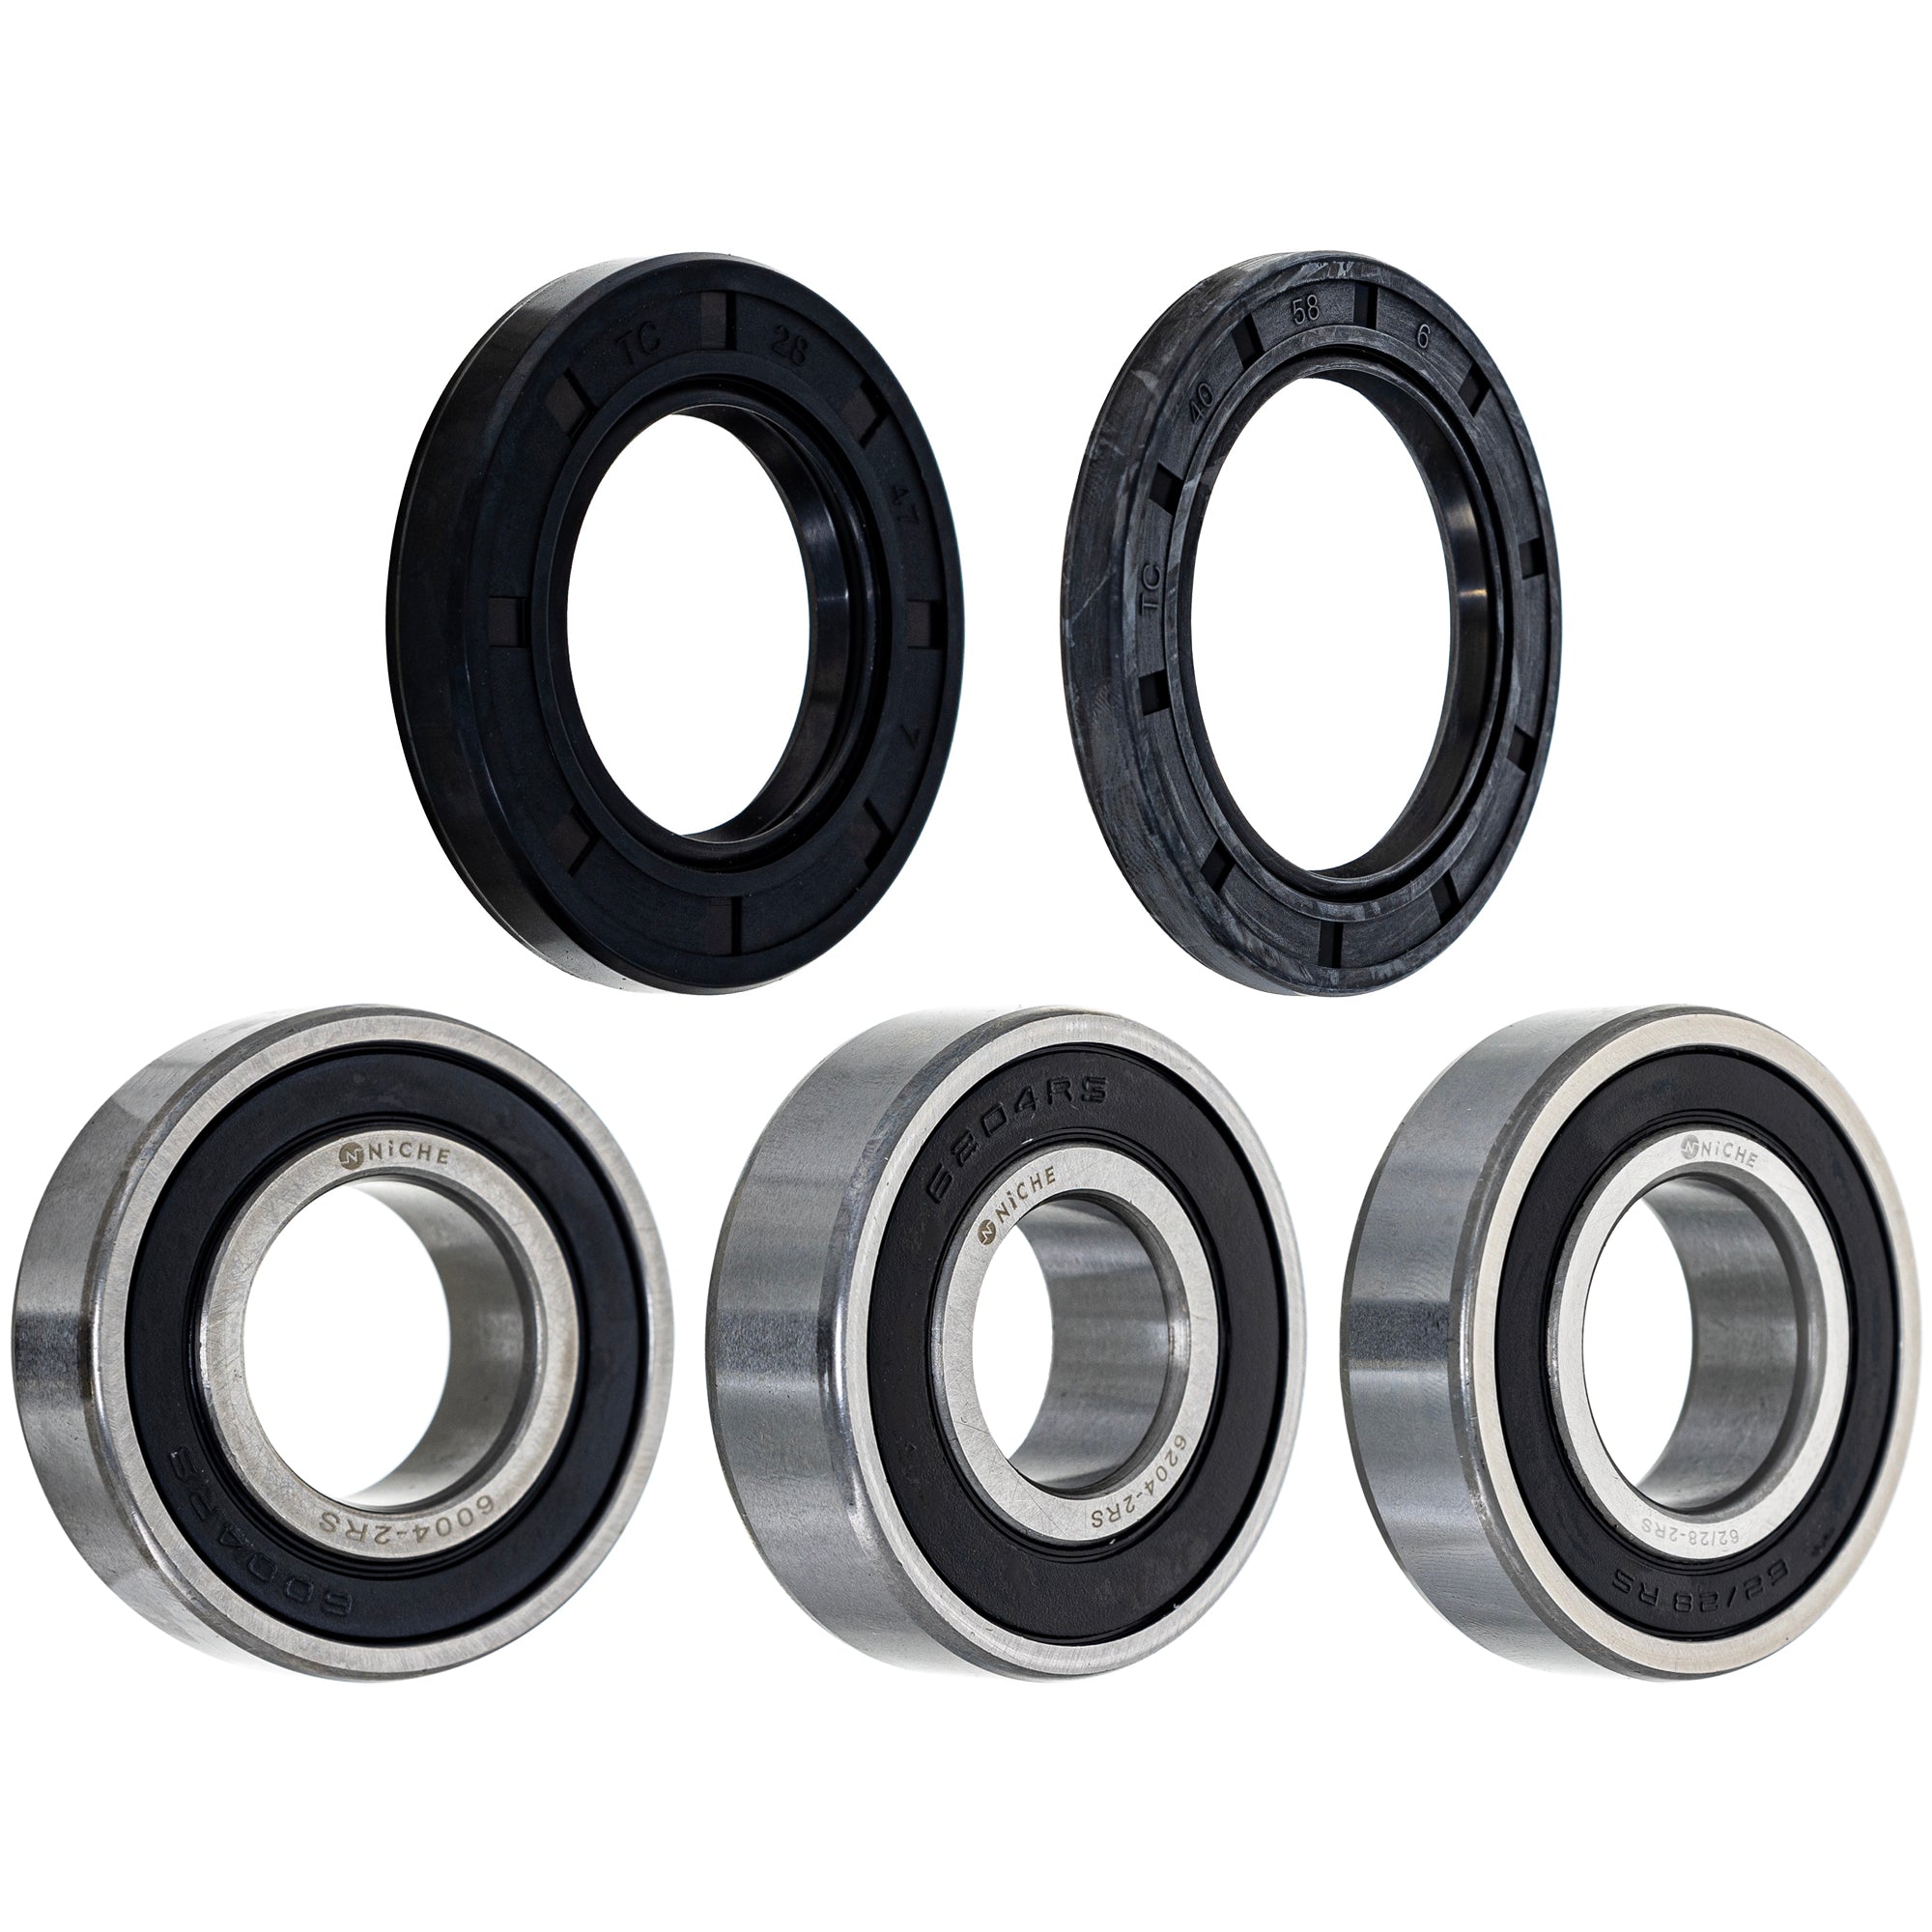 Wheel Bearing Seal Kit for zOTHER Ref No XSR900 XSR700 Tracer NICHE MK1008830